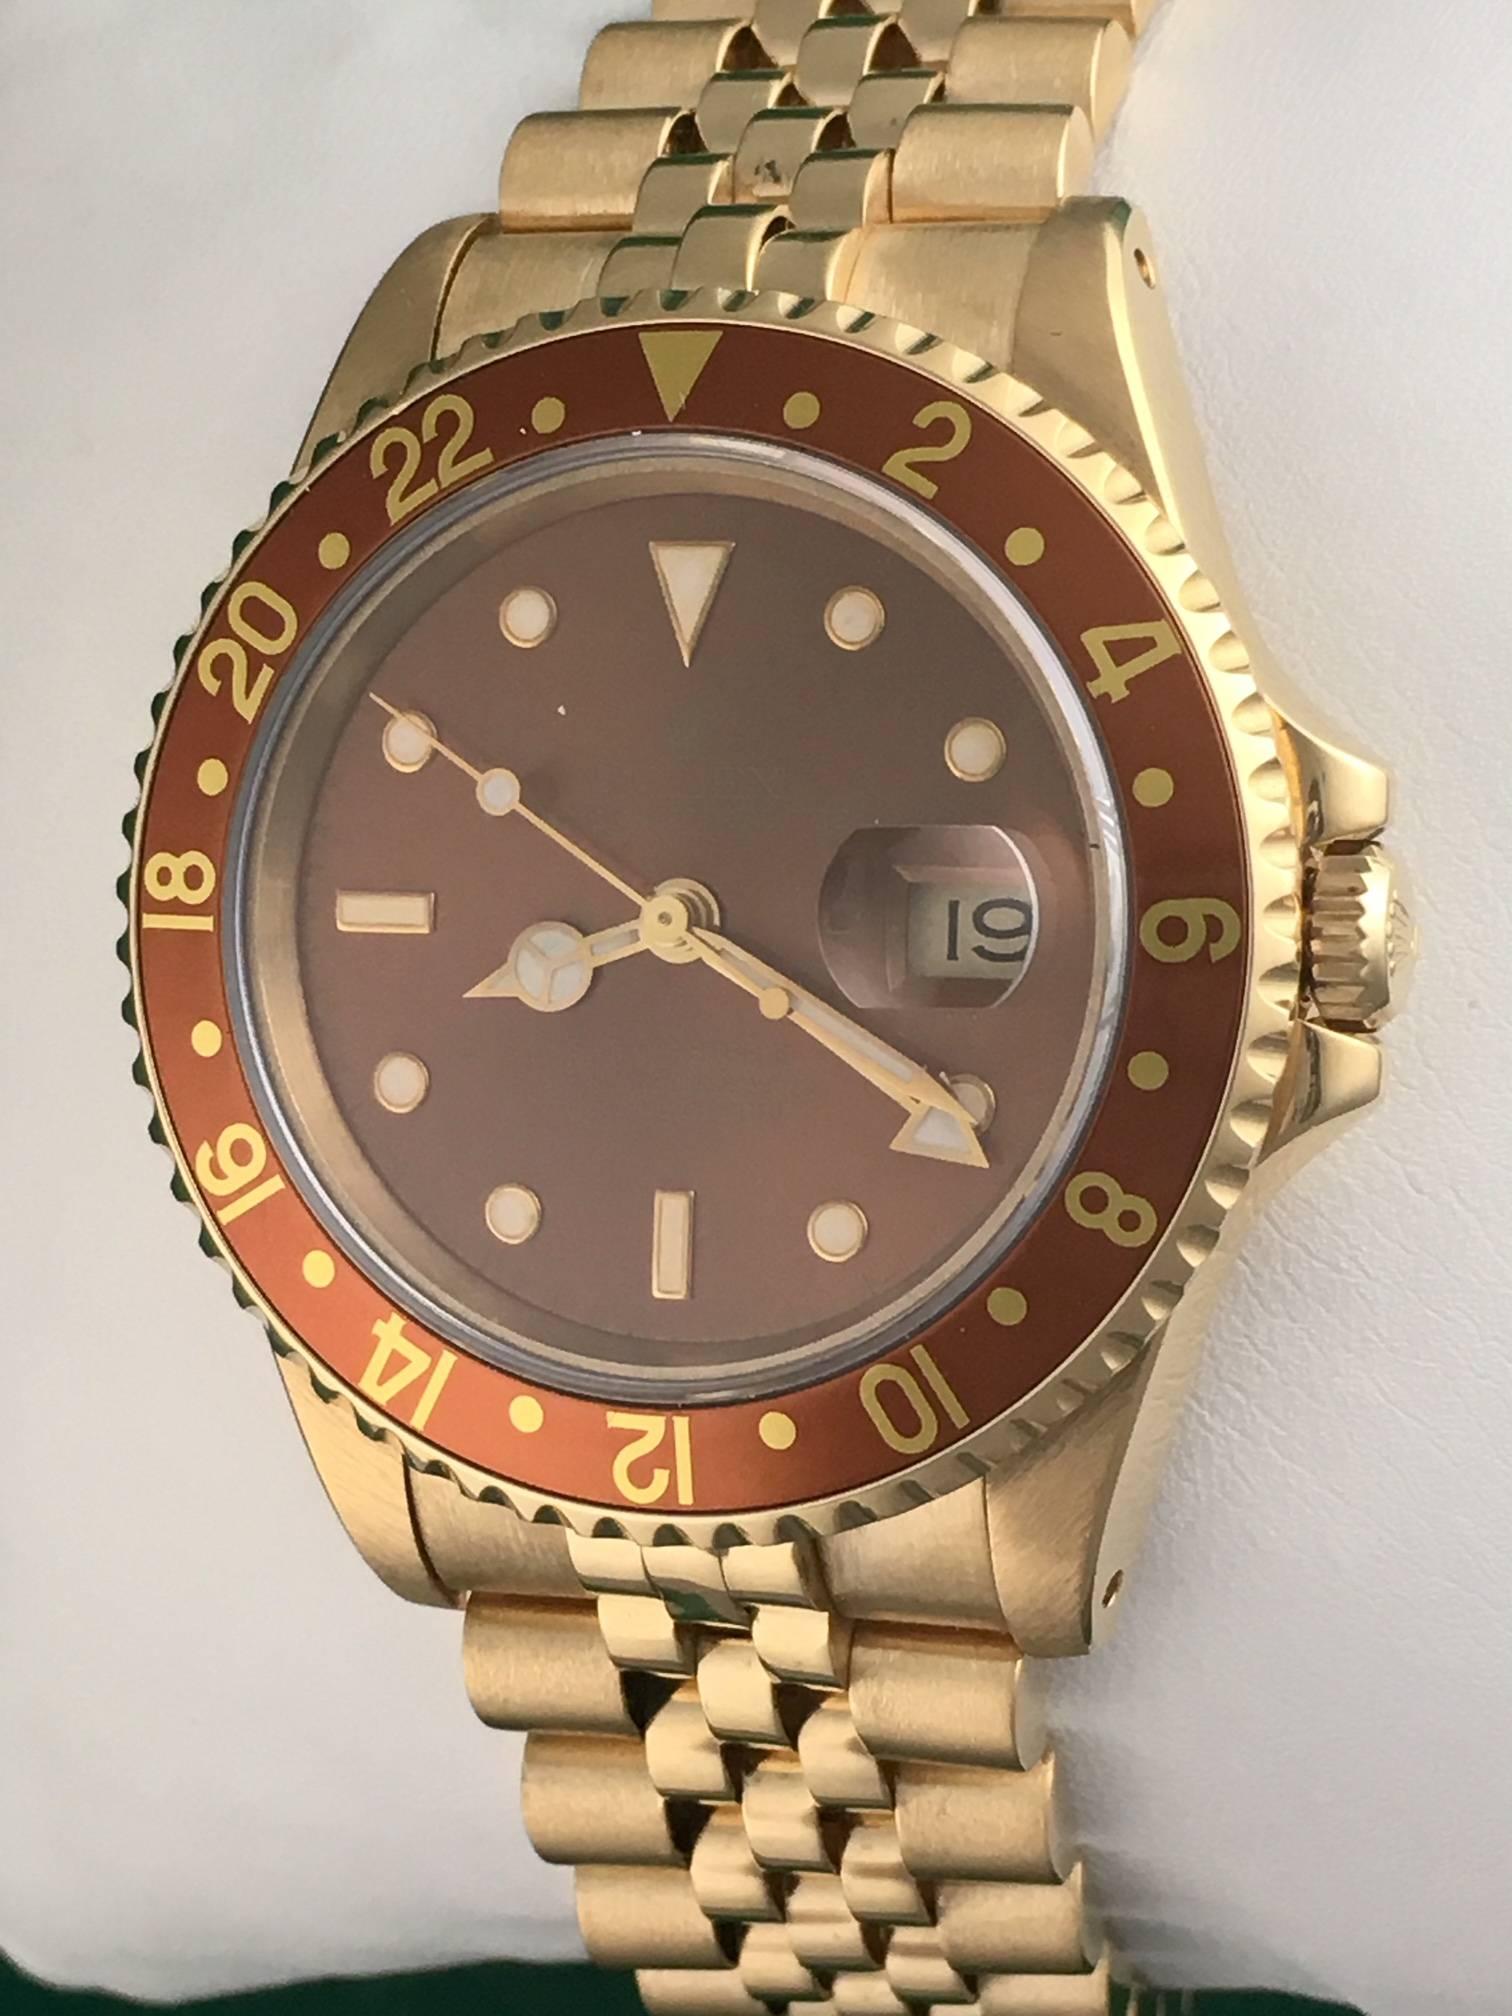 Rolex Men's GMT-Master II Model 16718 at a great price.  Automatic Winding Oyster Perpetual with Date Movement.  Featuring a stunning bronze dial with luminous markers,  18k yellow gold case with rotating bezel and bronze insert, and 18k Yellow Gold